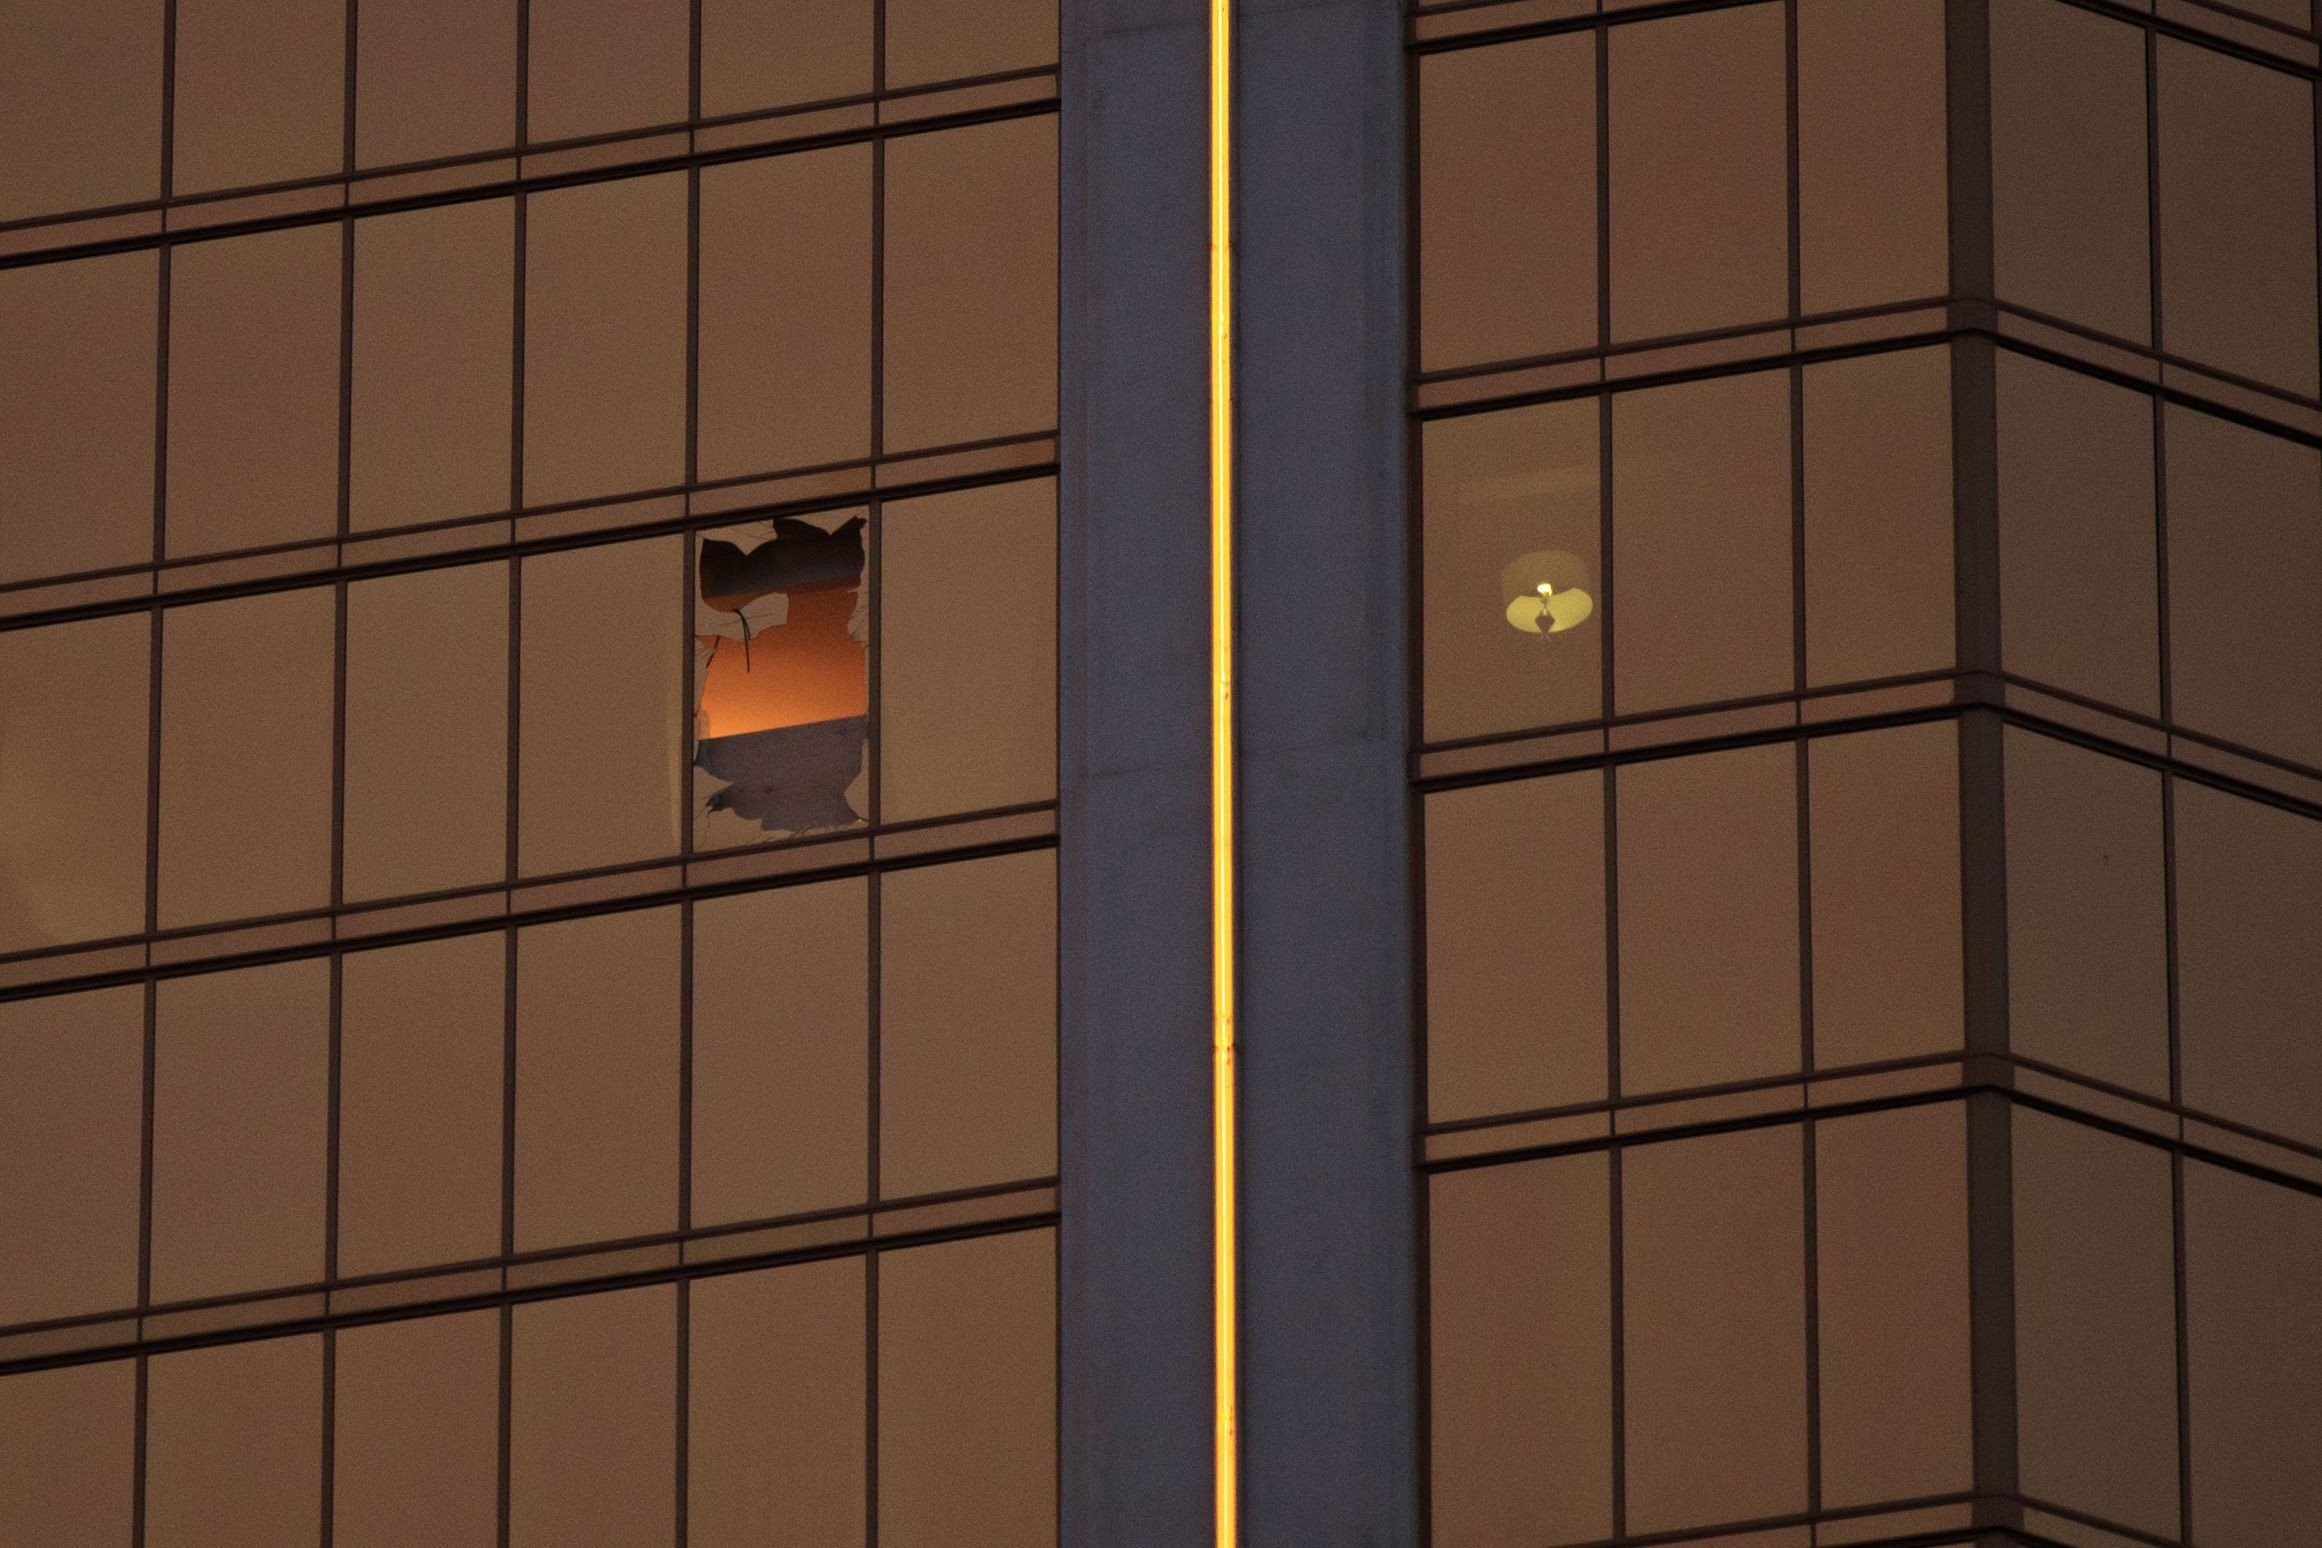 A smashed window in Room 32-135 of the Mandalay Bay Resort and Casino bears testimony to the mass slaughter conducted by Stephen Paddock, as he fired from the room into a crowd below on October 1. Photo: AFP